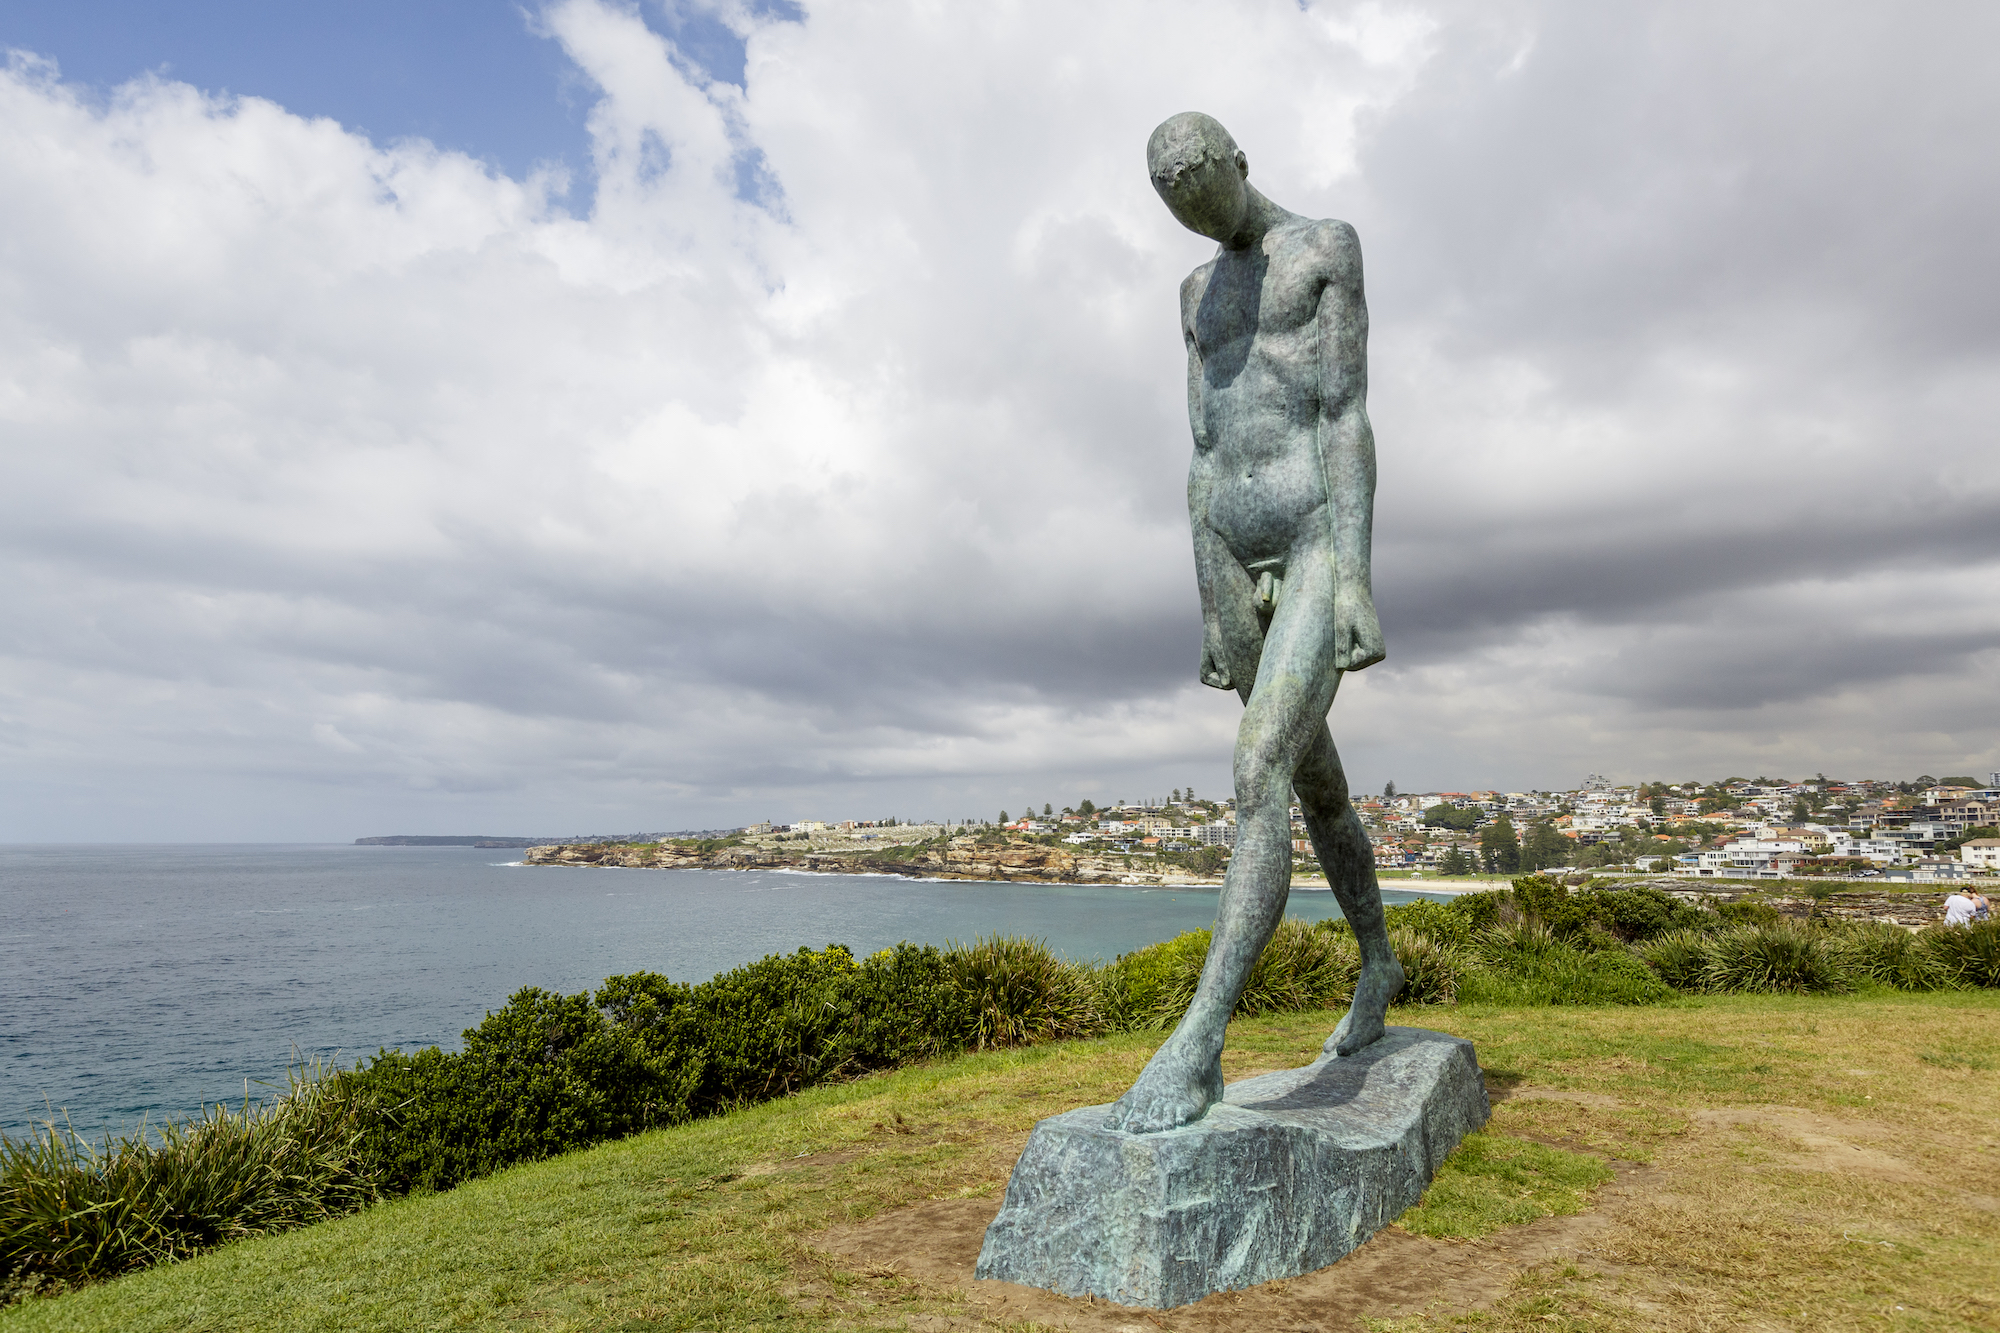 Sculpture by the Sea, Bondi and Cottesloe in images: - Sculpture by the Sea